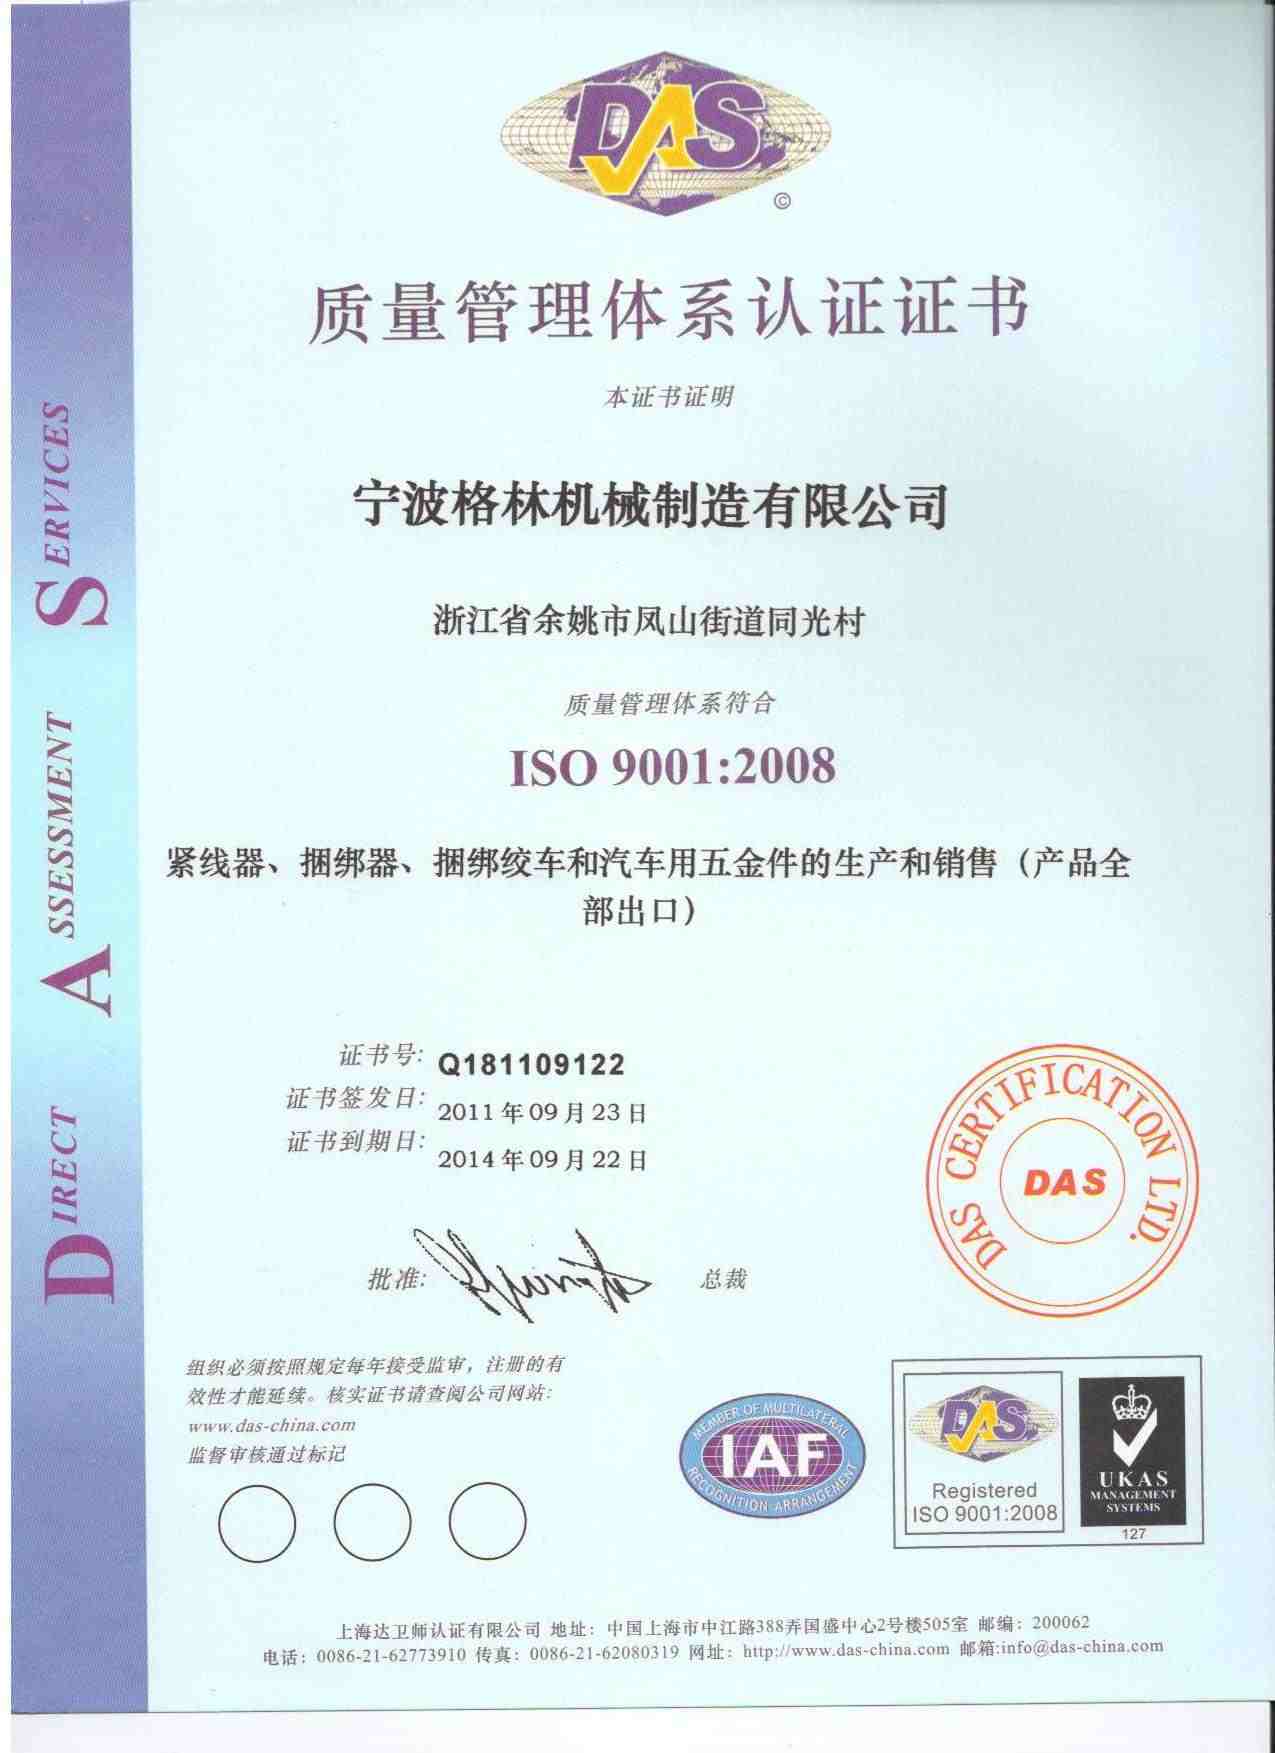 ISO 9001-2008 (Chinese)